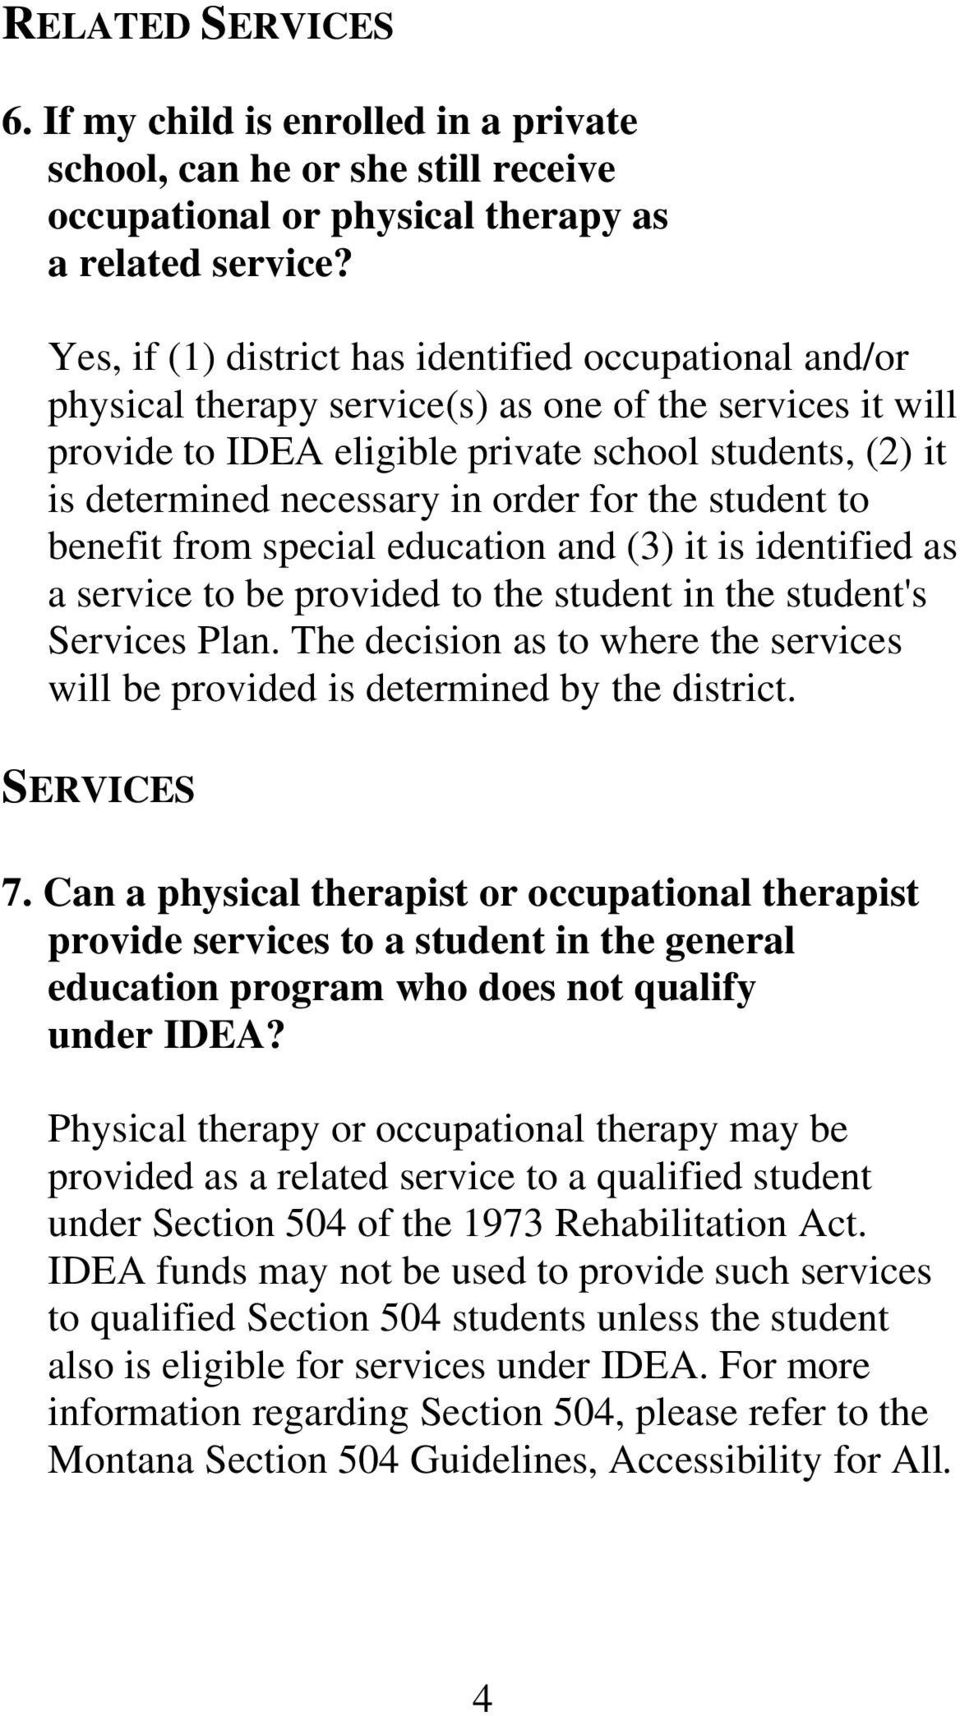 order for the student to benefit from special education and (3) it is identified as a service to be provided to the student in the student's Services Plan.